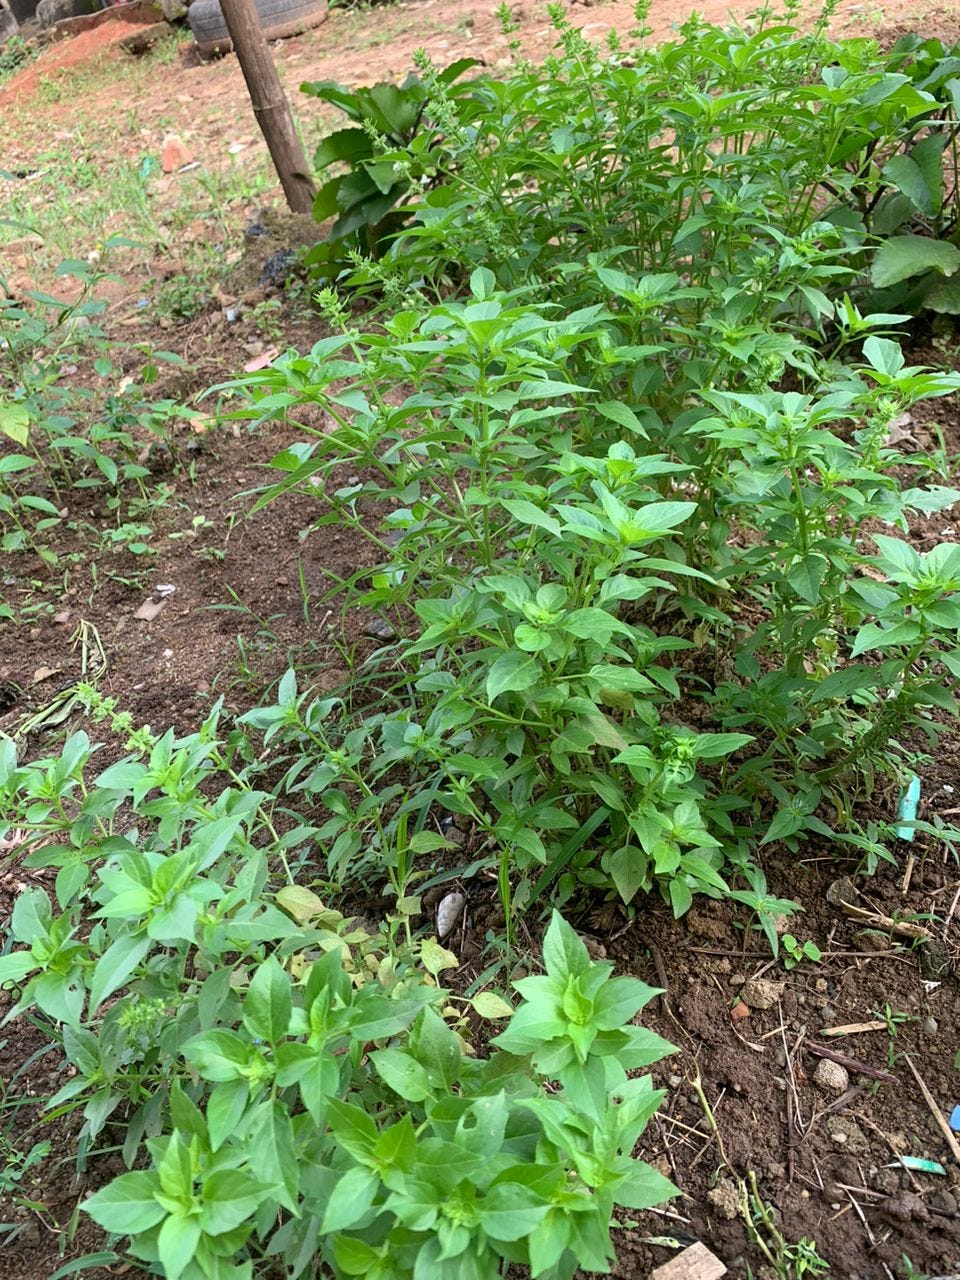 An image captures the thriving state of my garden, specifically showcasing the remarkable growth of the curry leaves plants